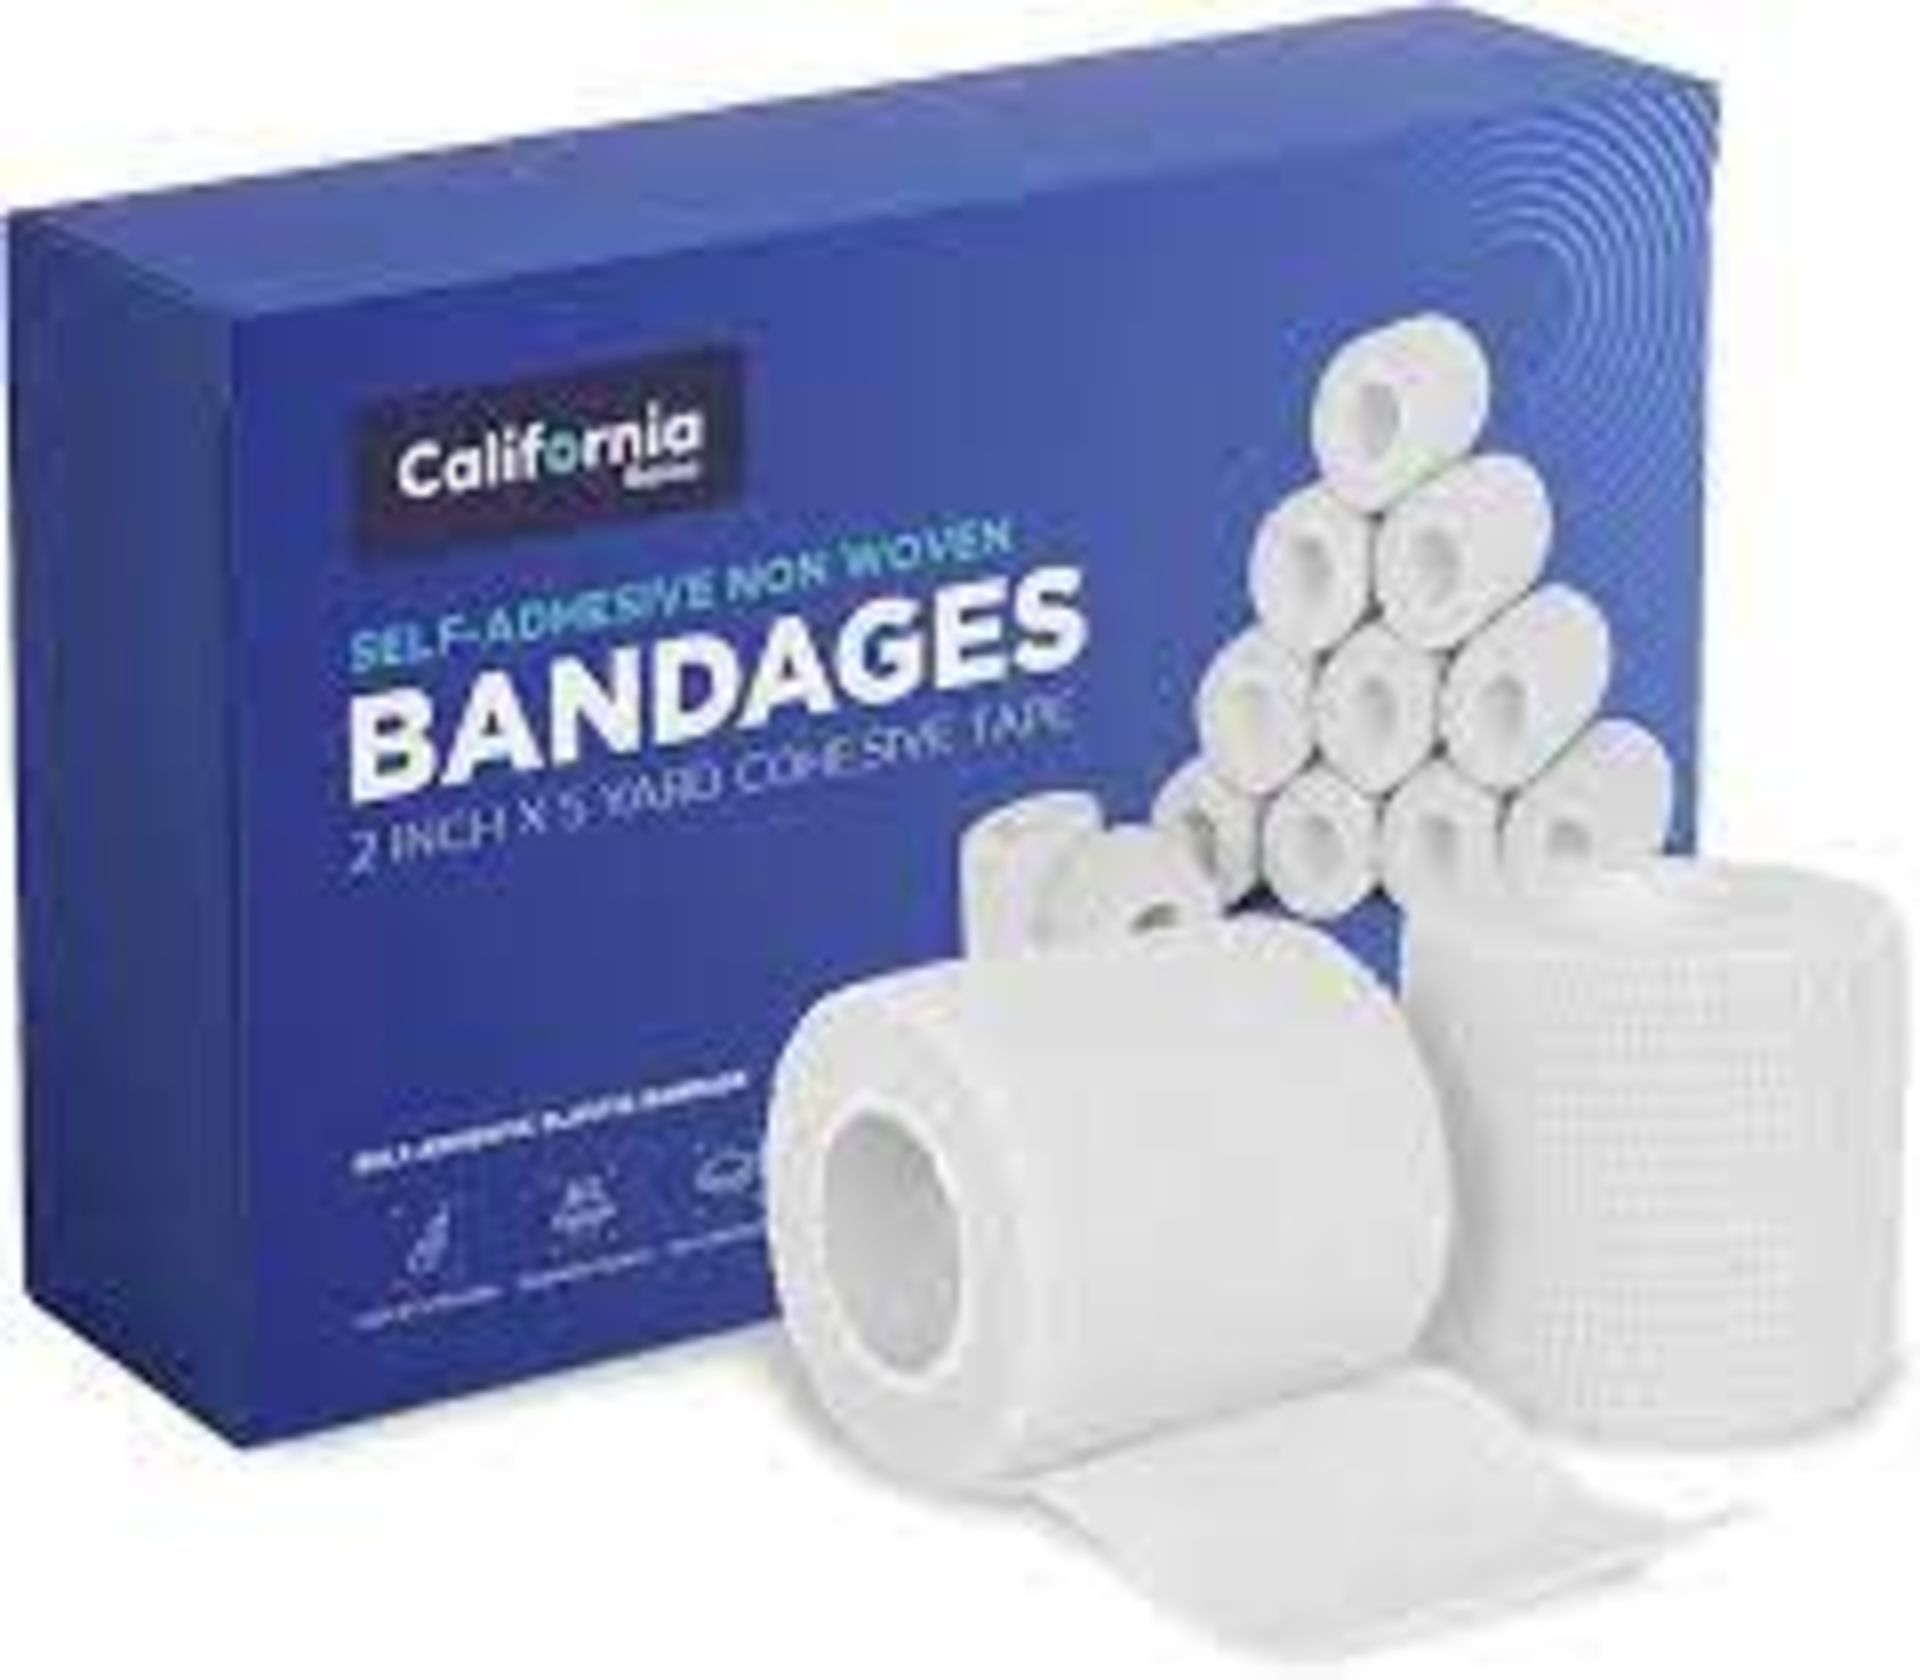 24 X BRAND NEW CALIFORNIA SETS OF 8 SELF ADHESIVE NON WOVEN BANDAGES 4 INCH X 5 YARD COHESIVE TAPE - Image 2 of 3